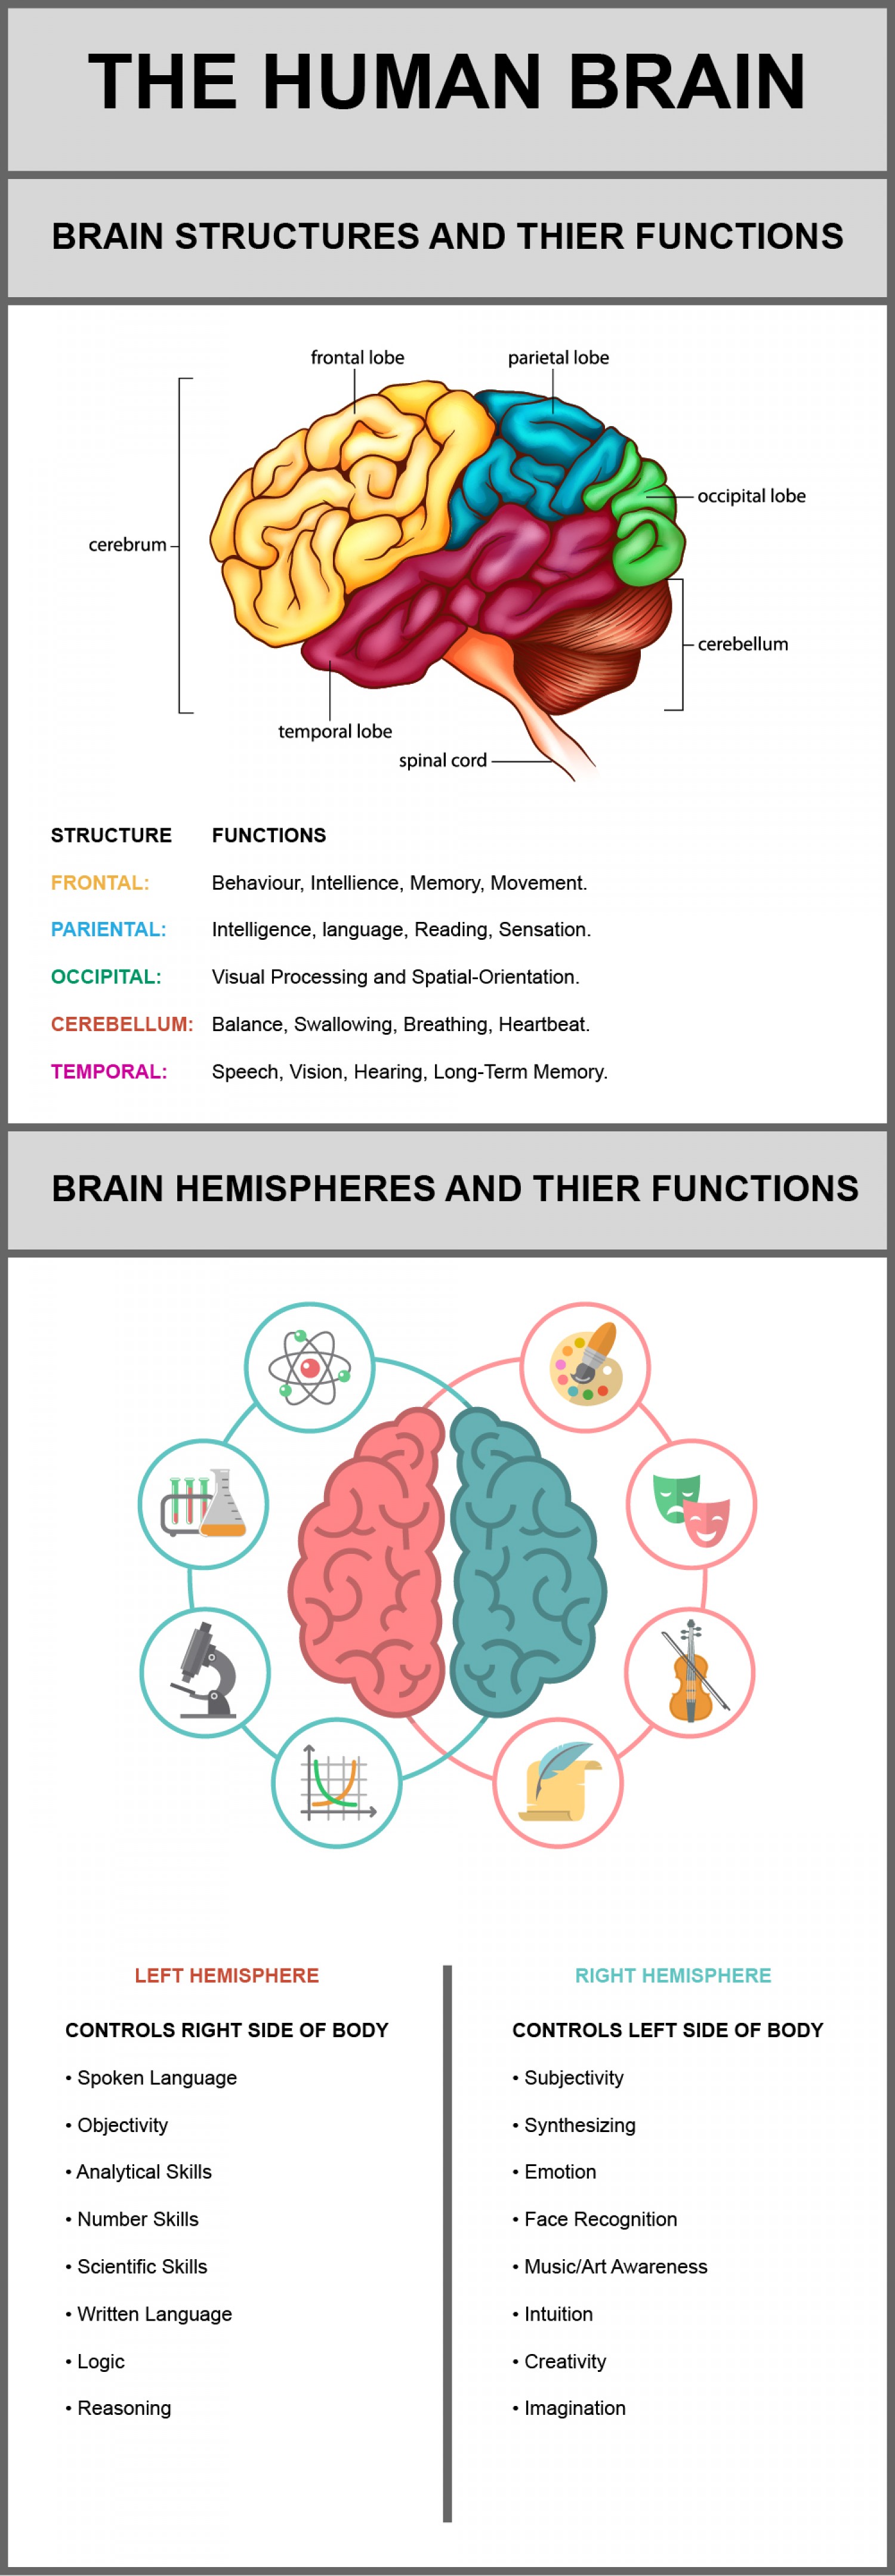 The Human Brain Its Structures and Their Functions (Infographic)